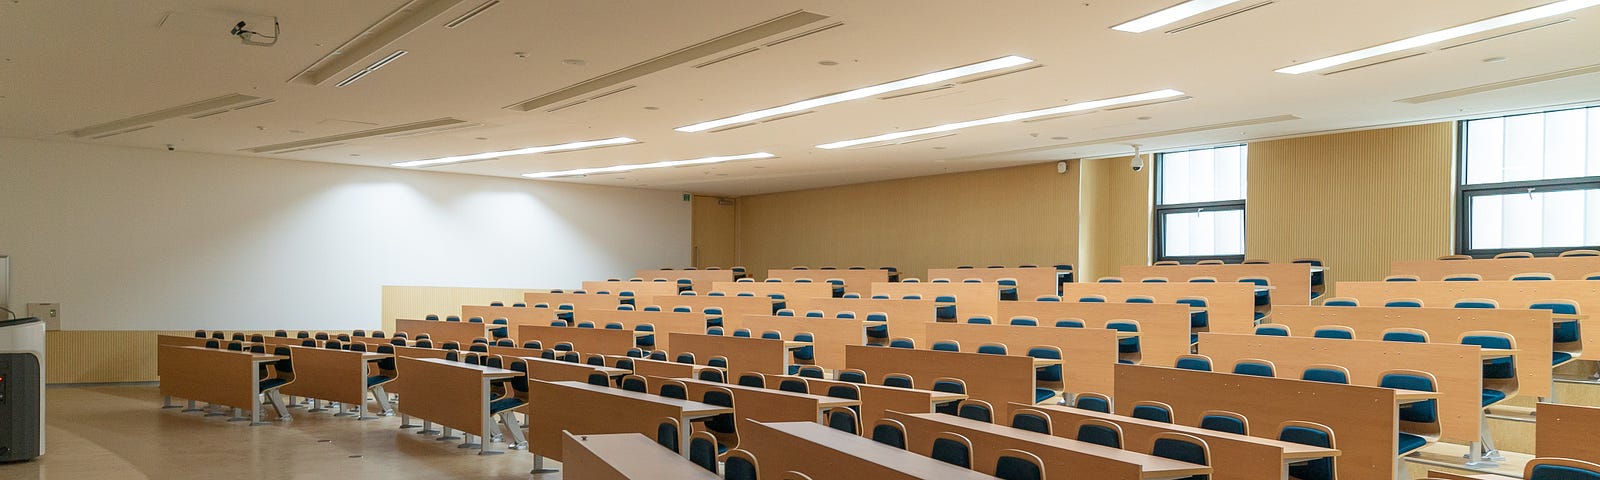 A University lecture hall